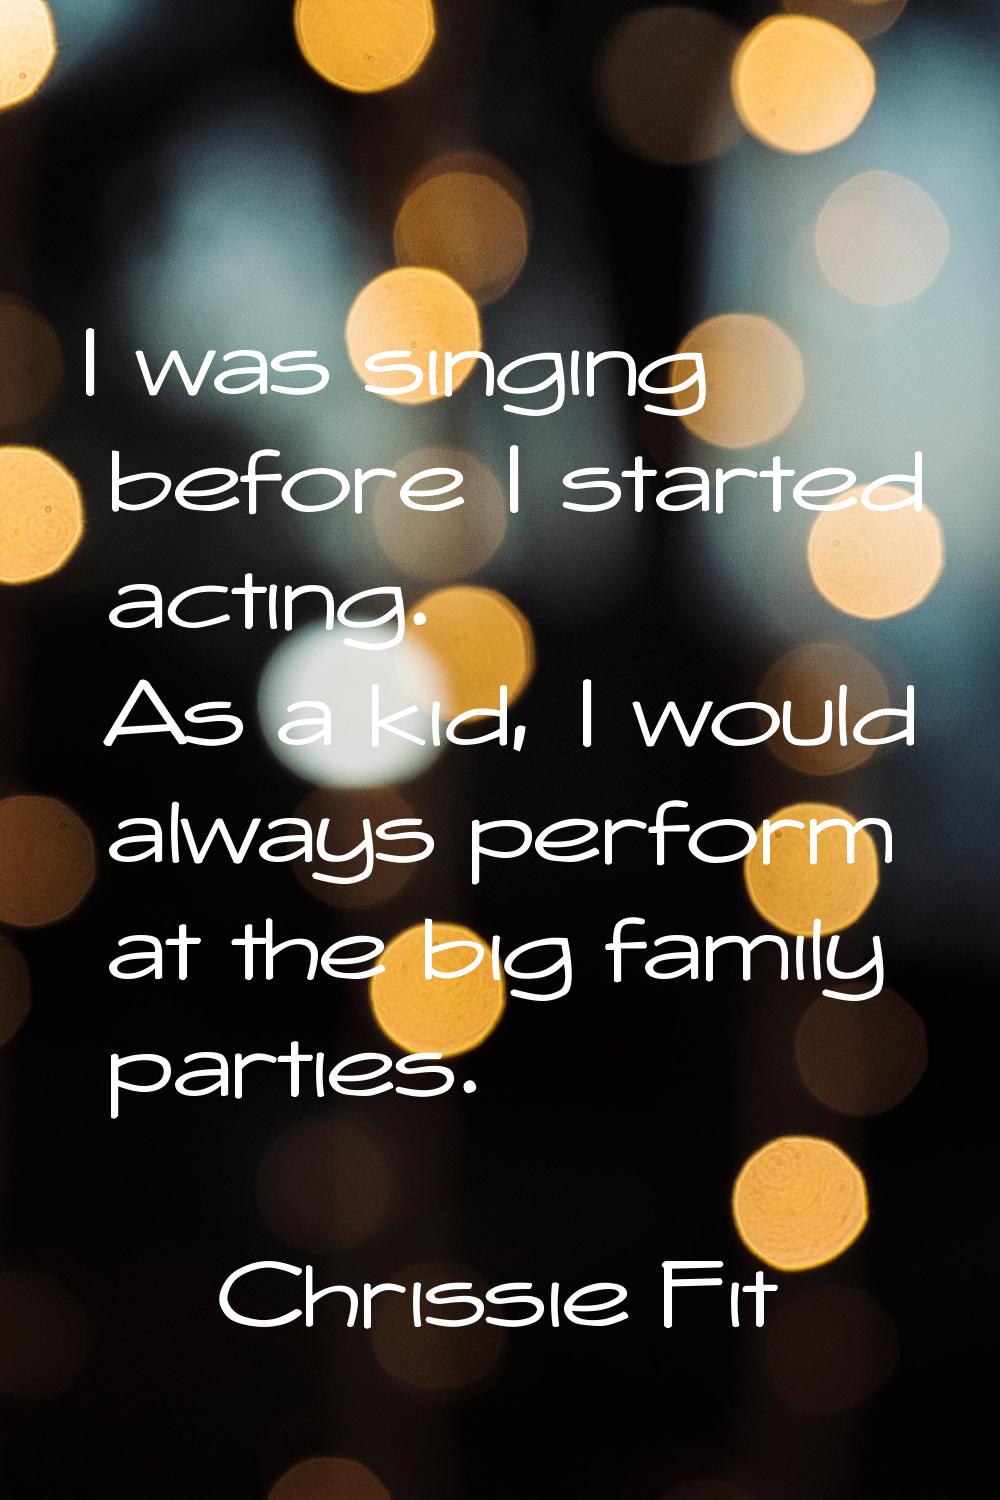 I was singing before I started acting. As a kid, I would always perform at the big family parties.